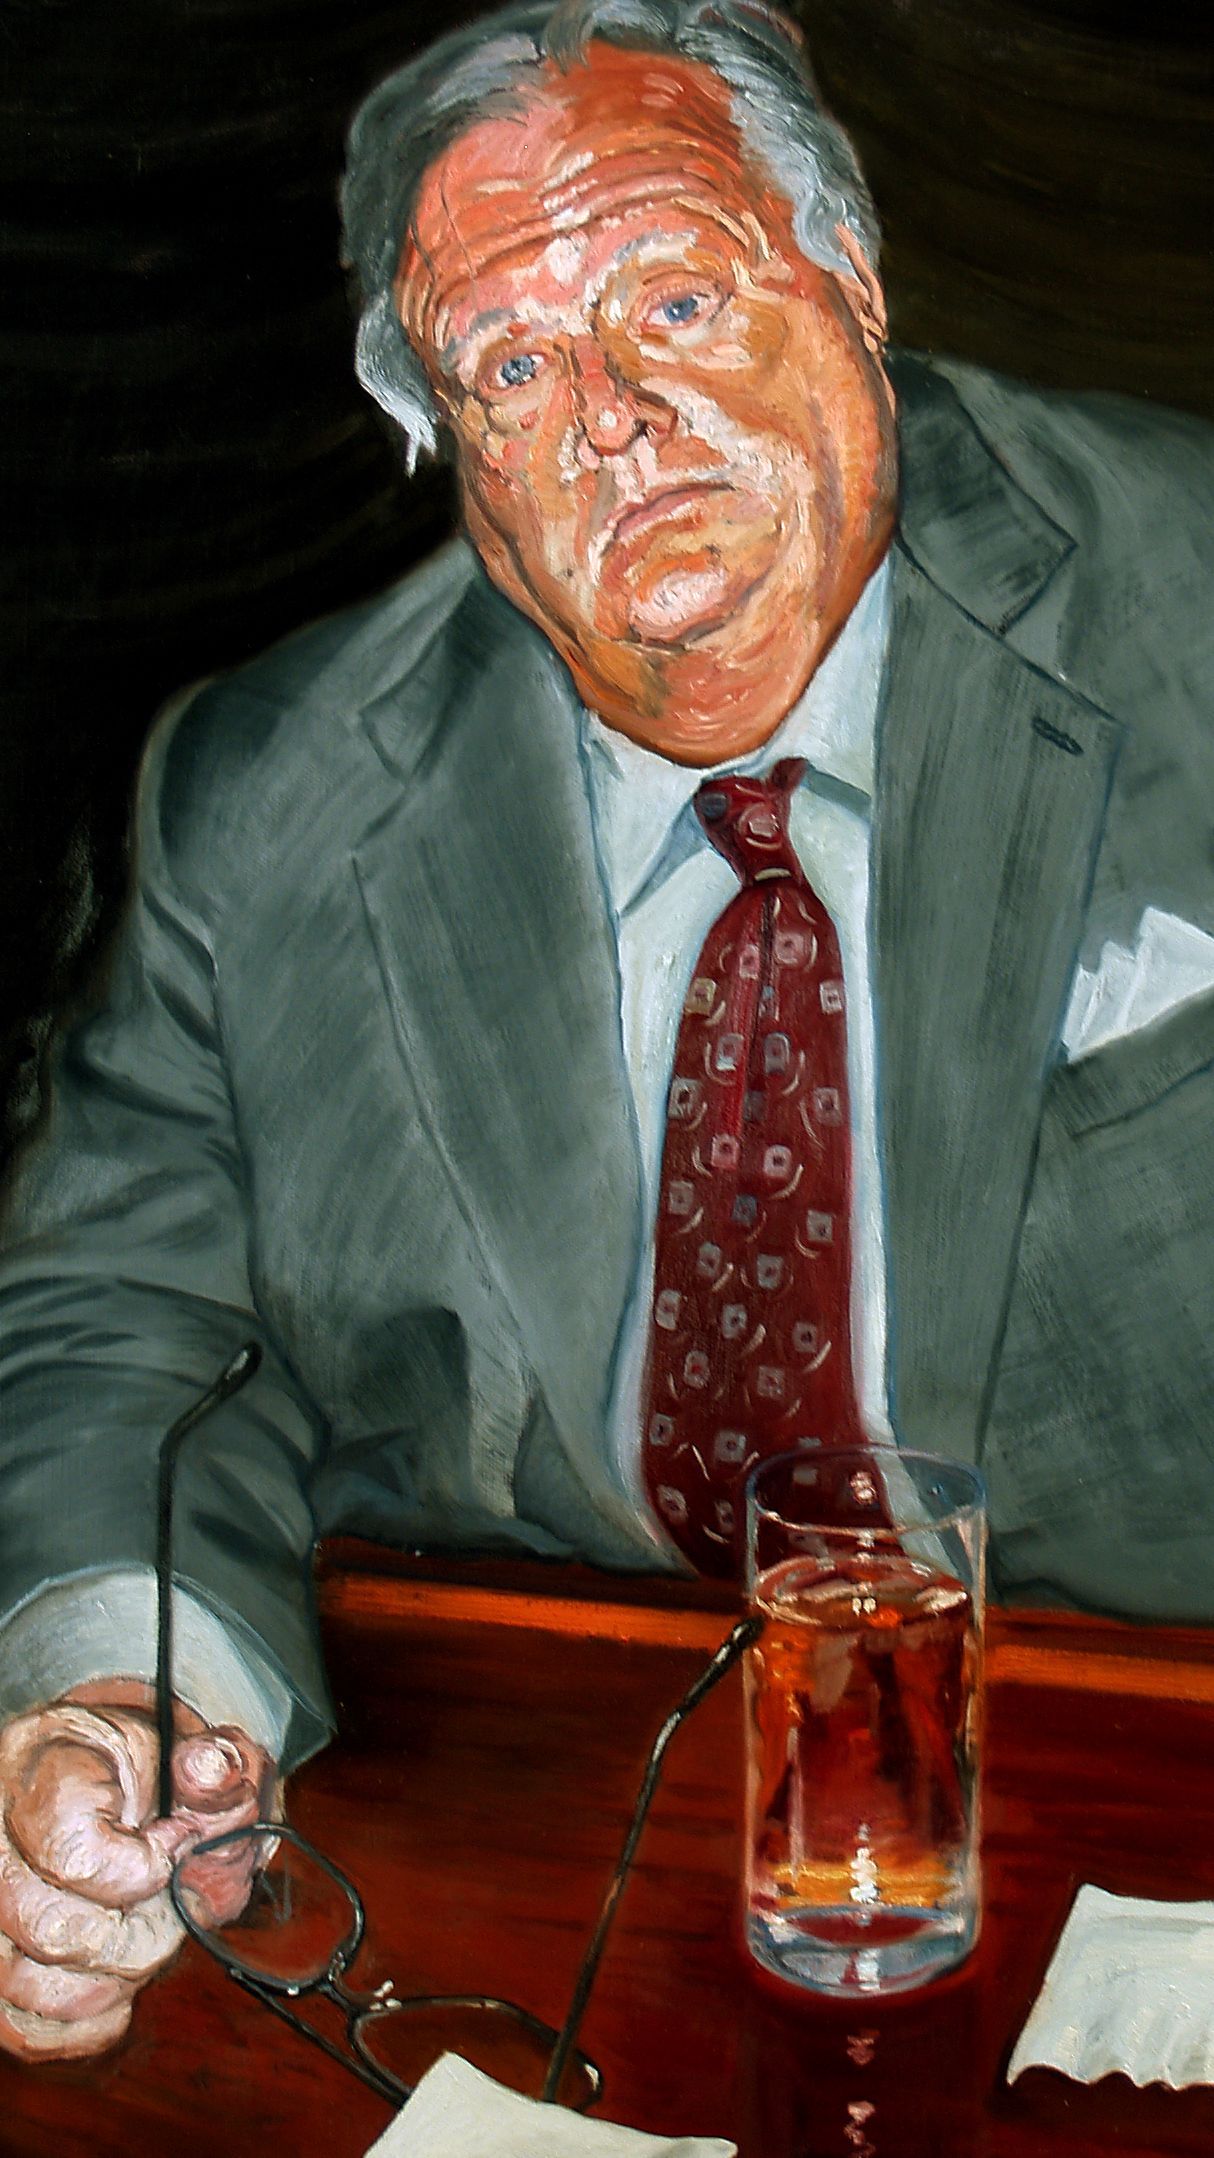 sir charles | figurative oil painting by John Varriano